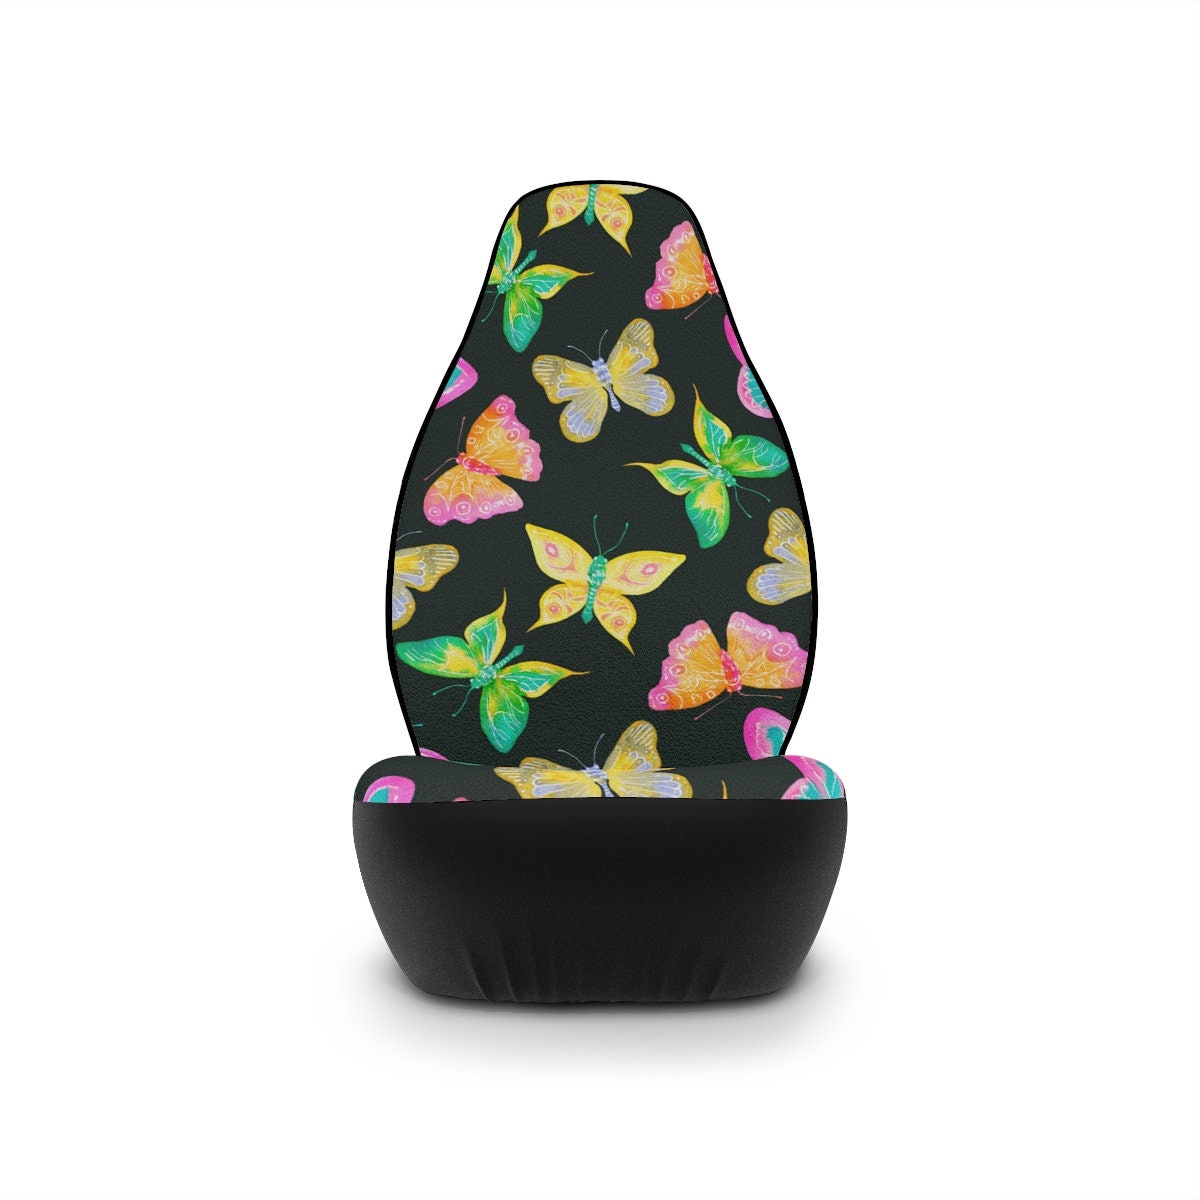 Seat Covers for Cars, Butterfly Boho Car Seat Cover, Hippie Car Accessories for Women, Colorful Bohemian Universal Vehicle Seat Protector HMDesignStudioUS